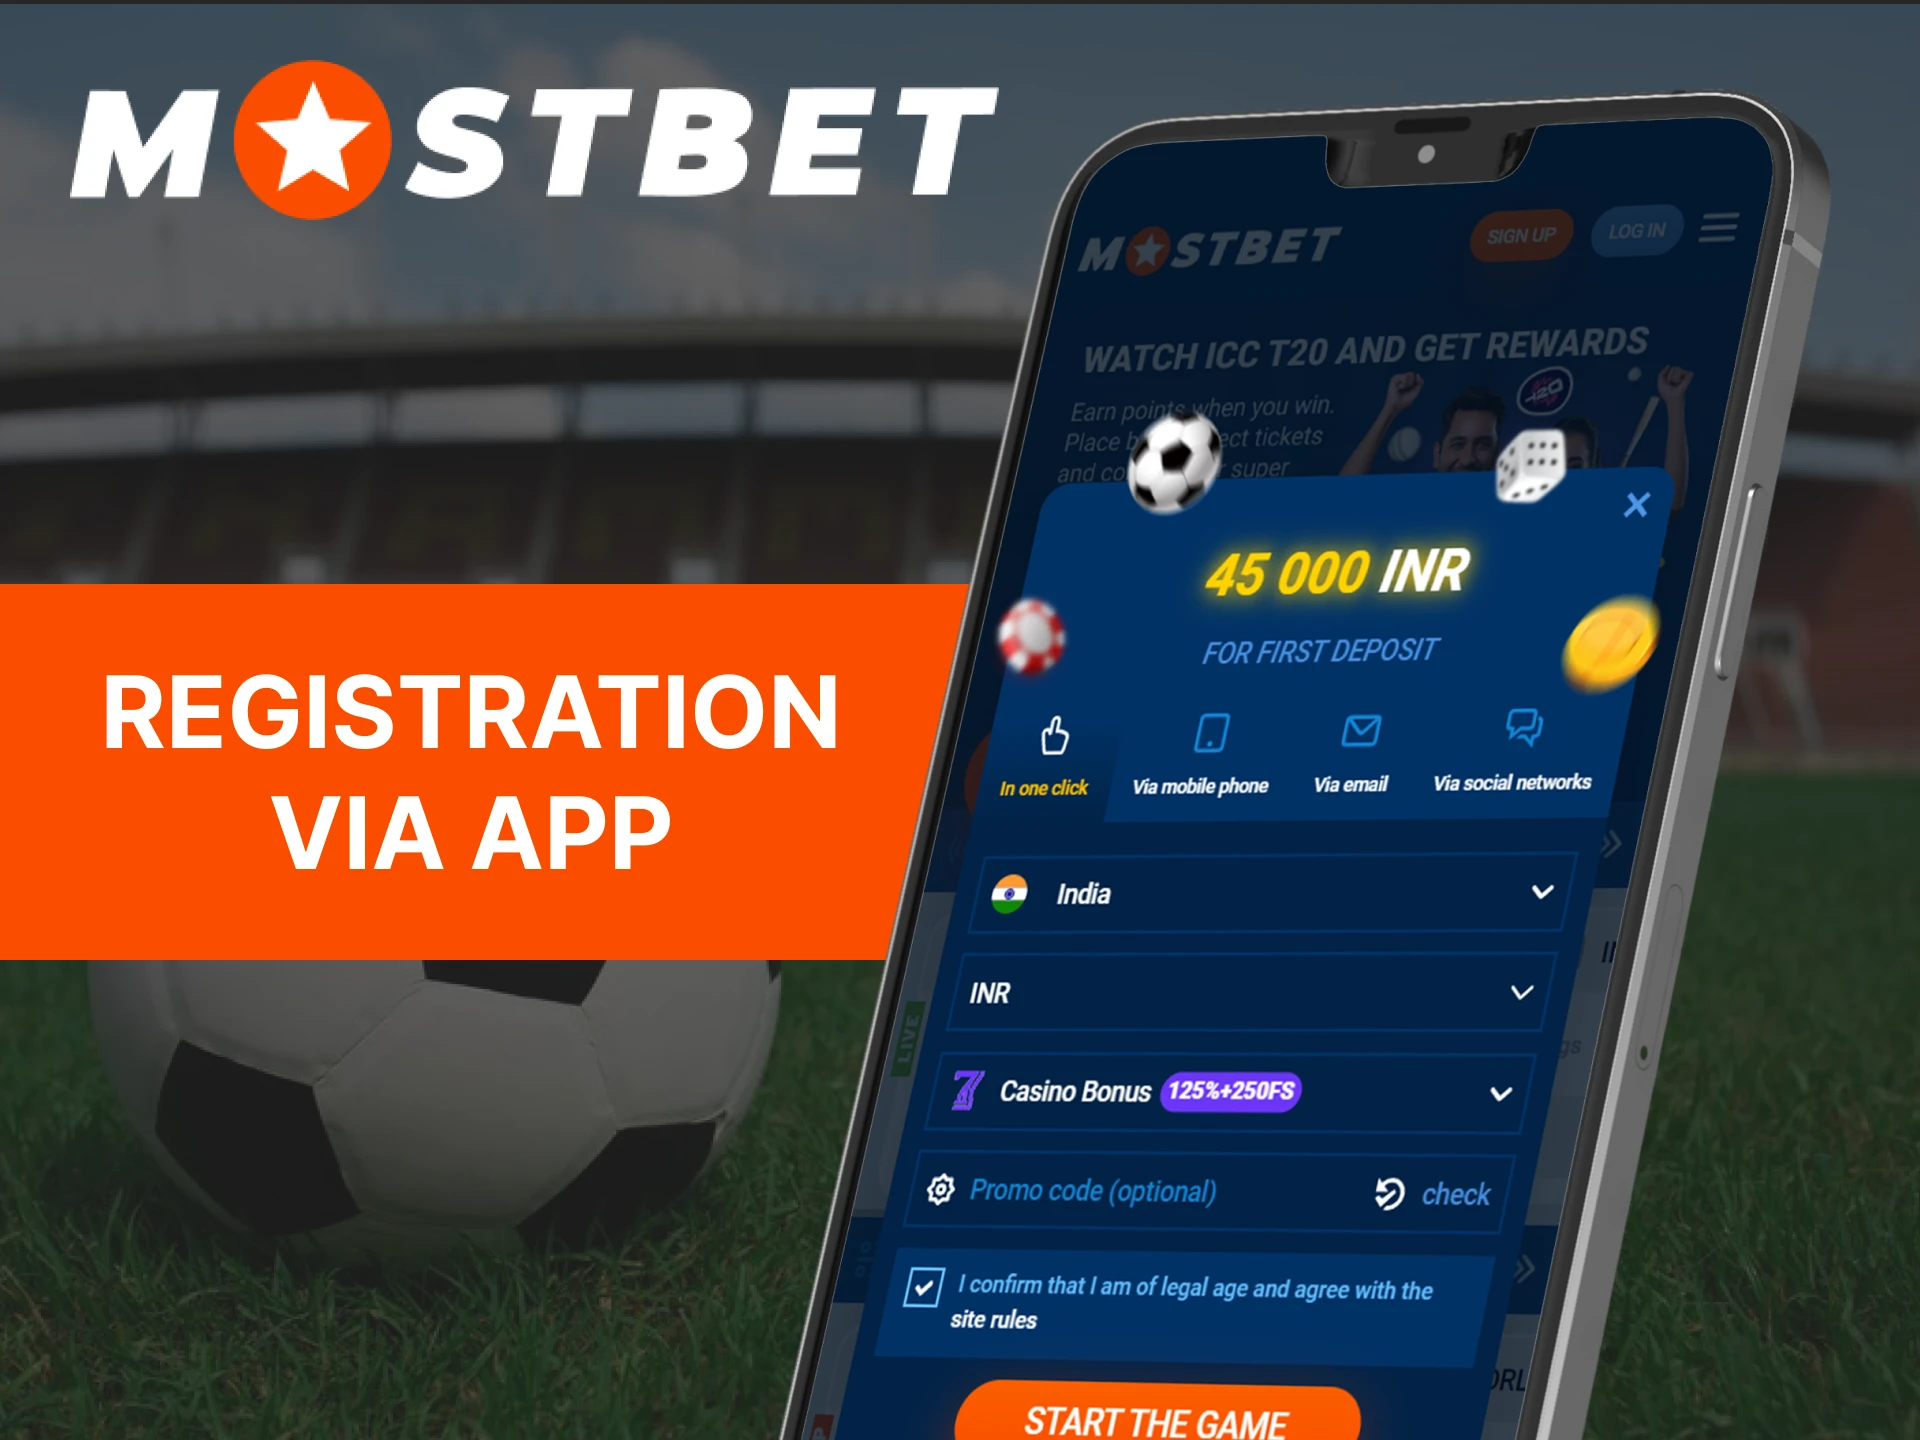 The registration form in the Mostbet mobile app is similar to the form on the website.